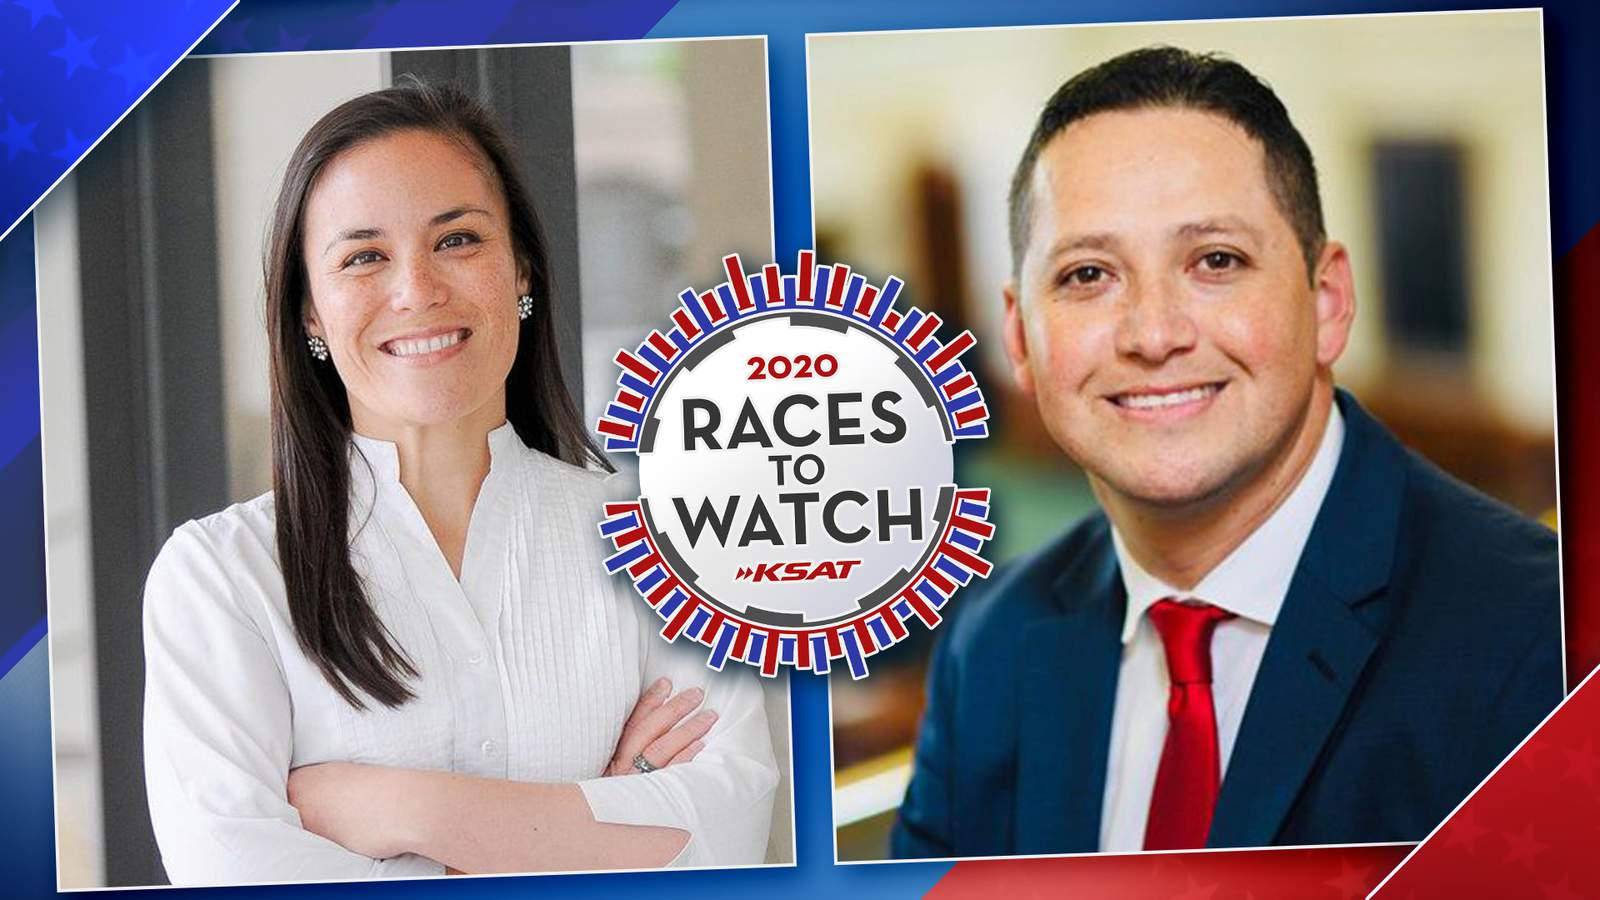 Texas CD-23 candidates face off in debate